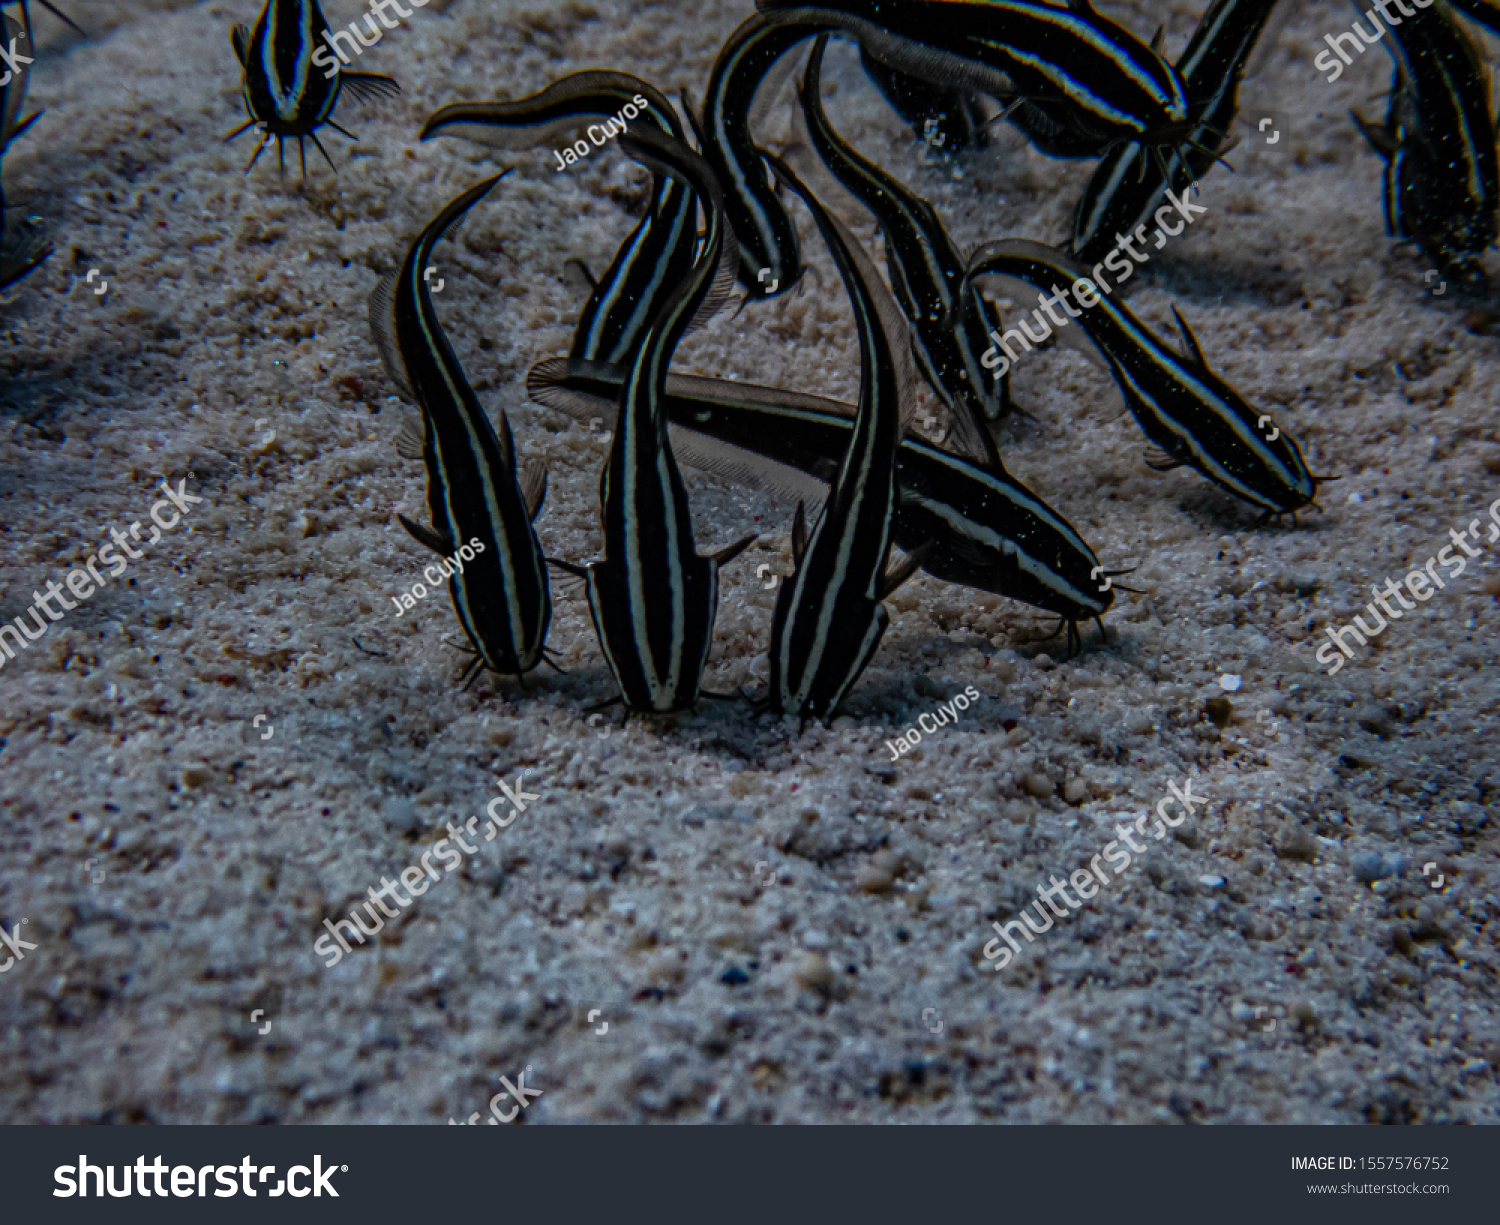 School of juvenile striped eel catfish (Plotosus lineatus) search and stir the sand for crustaceans, mollusks, worms. #1557576752